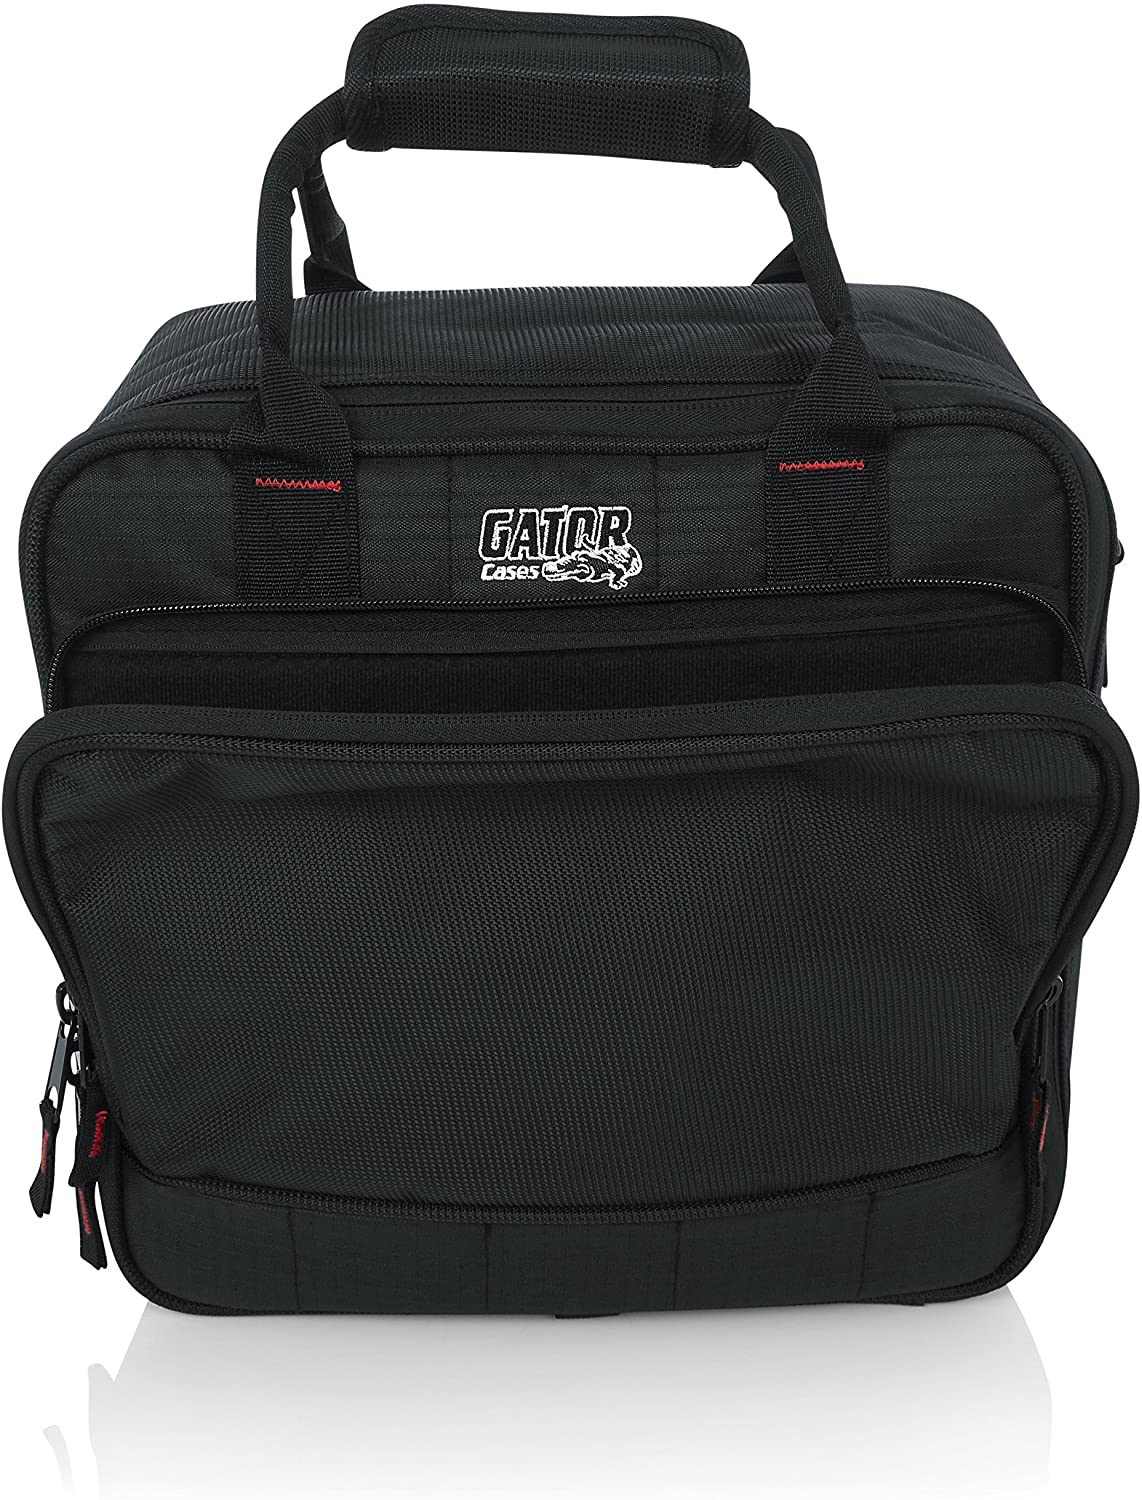 Gator Cases Padded Nylon Mixer/Gear Carry Bag with Removable Strap; 12" x 12" x 5.5" - G-MIXERBAG-1212 - Pro-Distributing